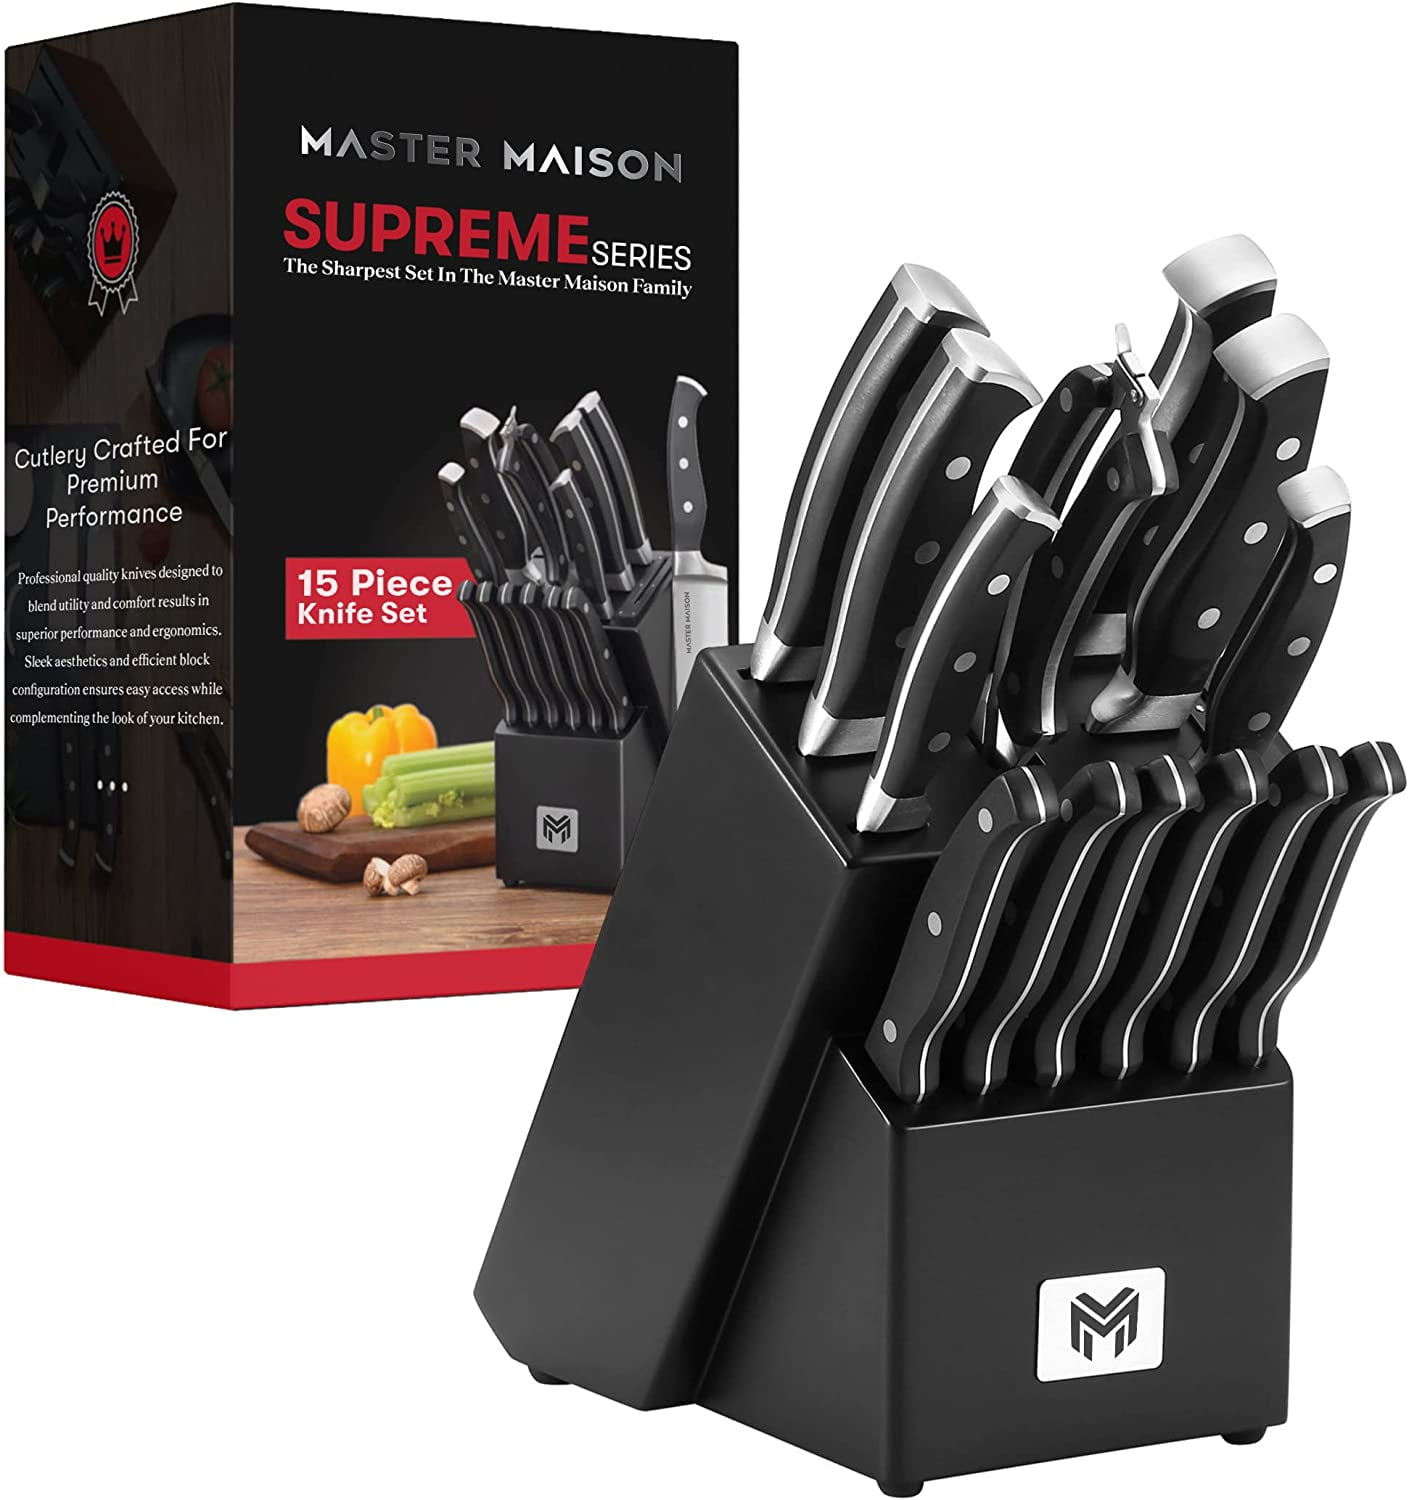 Review of Master Maison knife set 